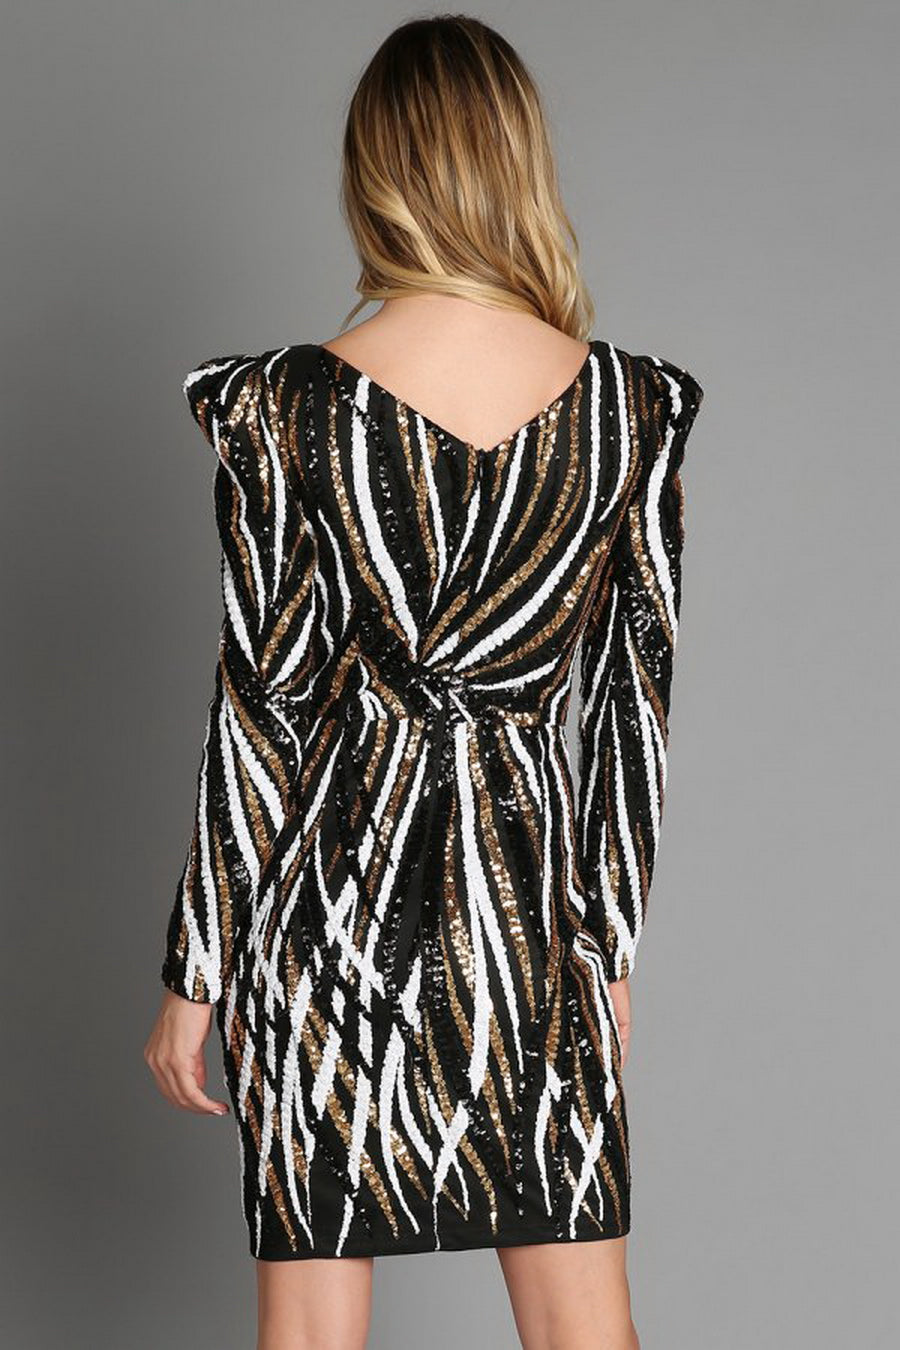 black and white sequin dress